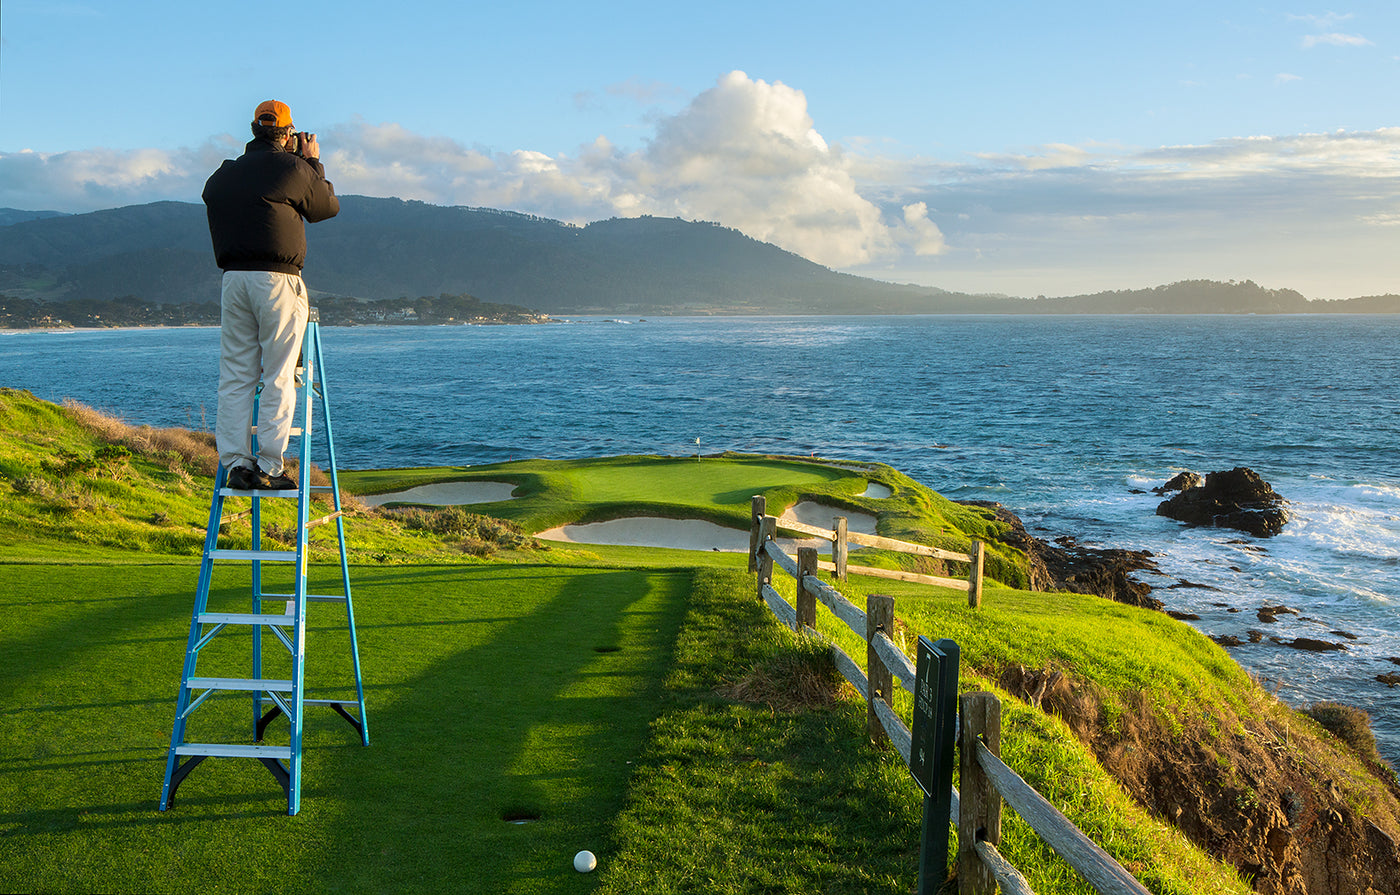 Evan Schiller Photographing the 7th hole at Pebble Beach Golf Links at sunset